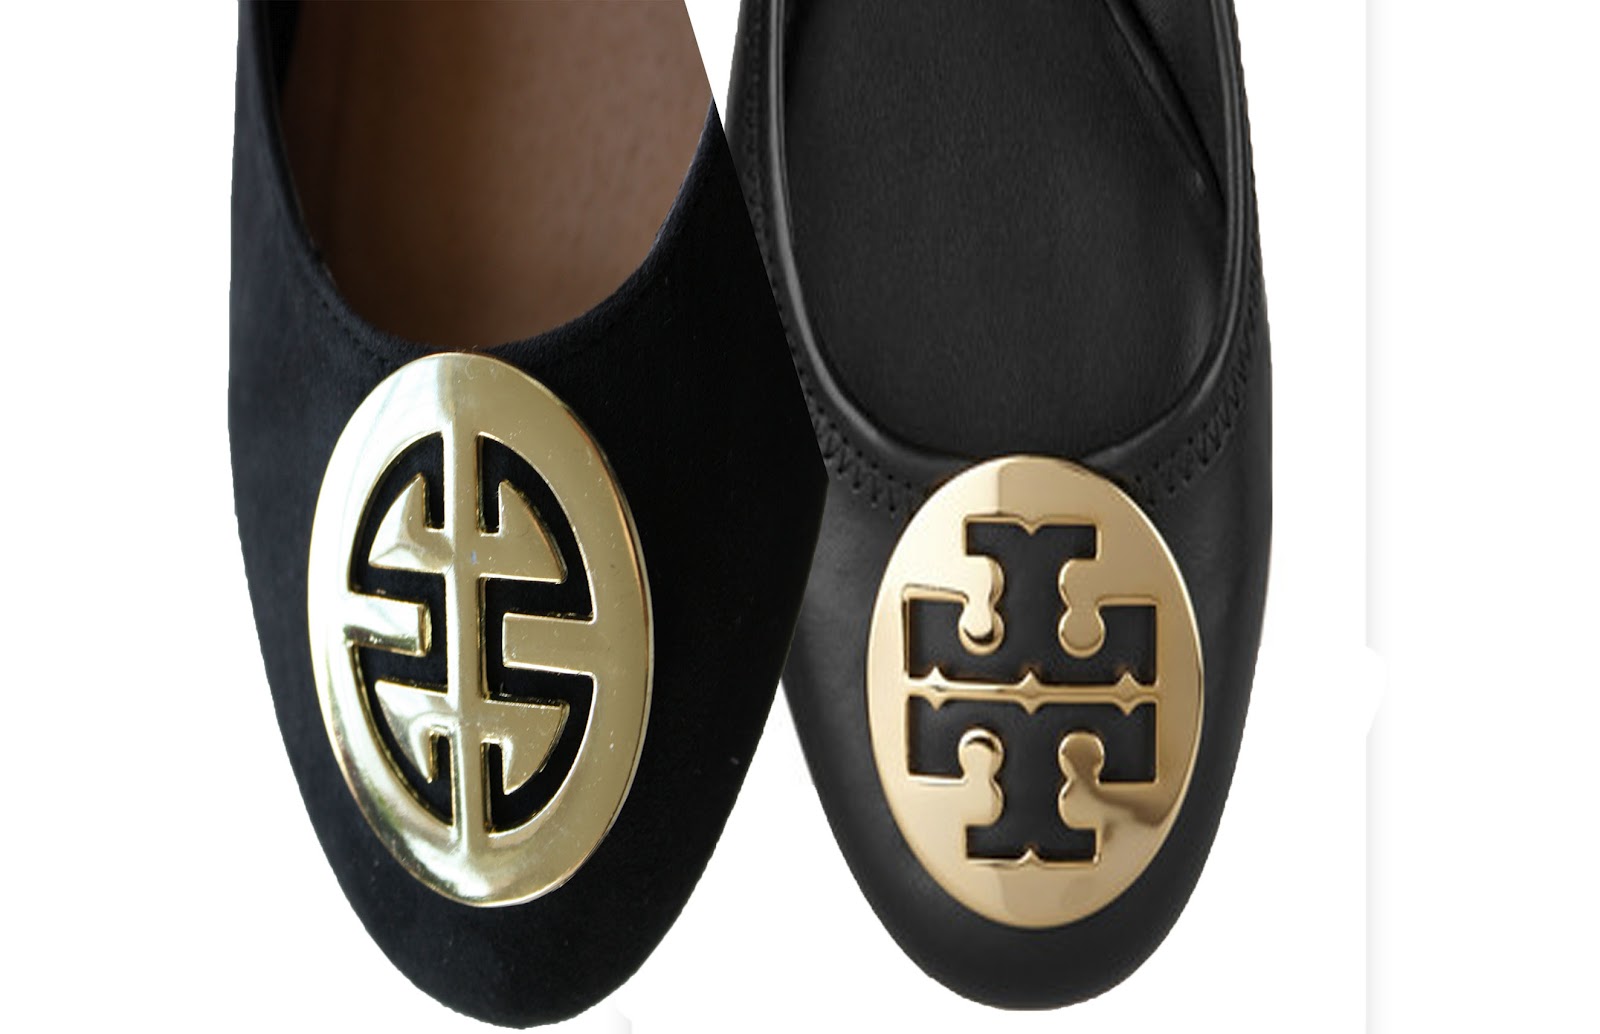 Aspirations Of Glam: Tory Burch Shoe Dupe.